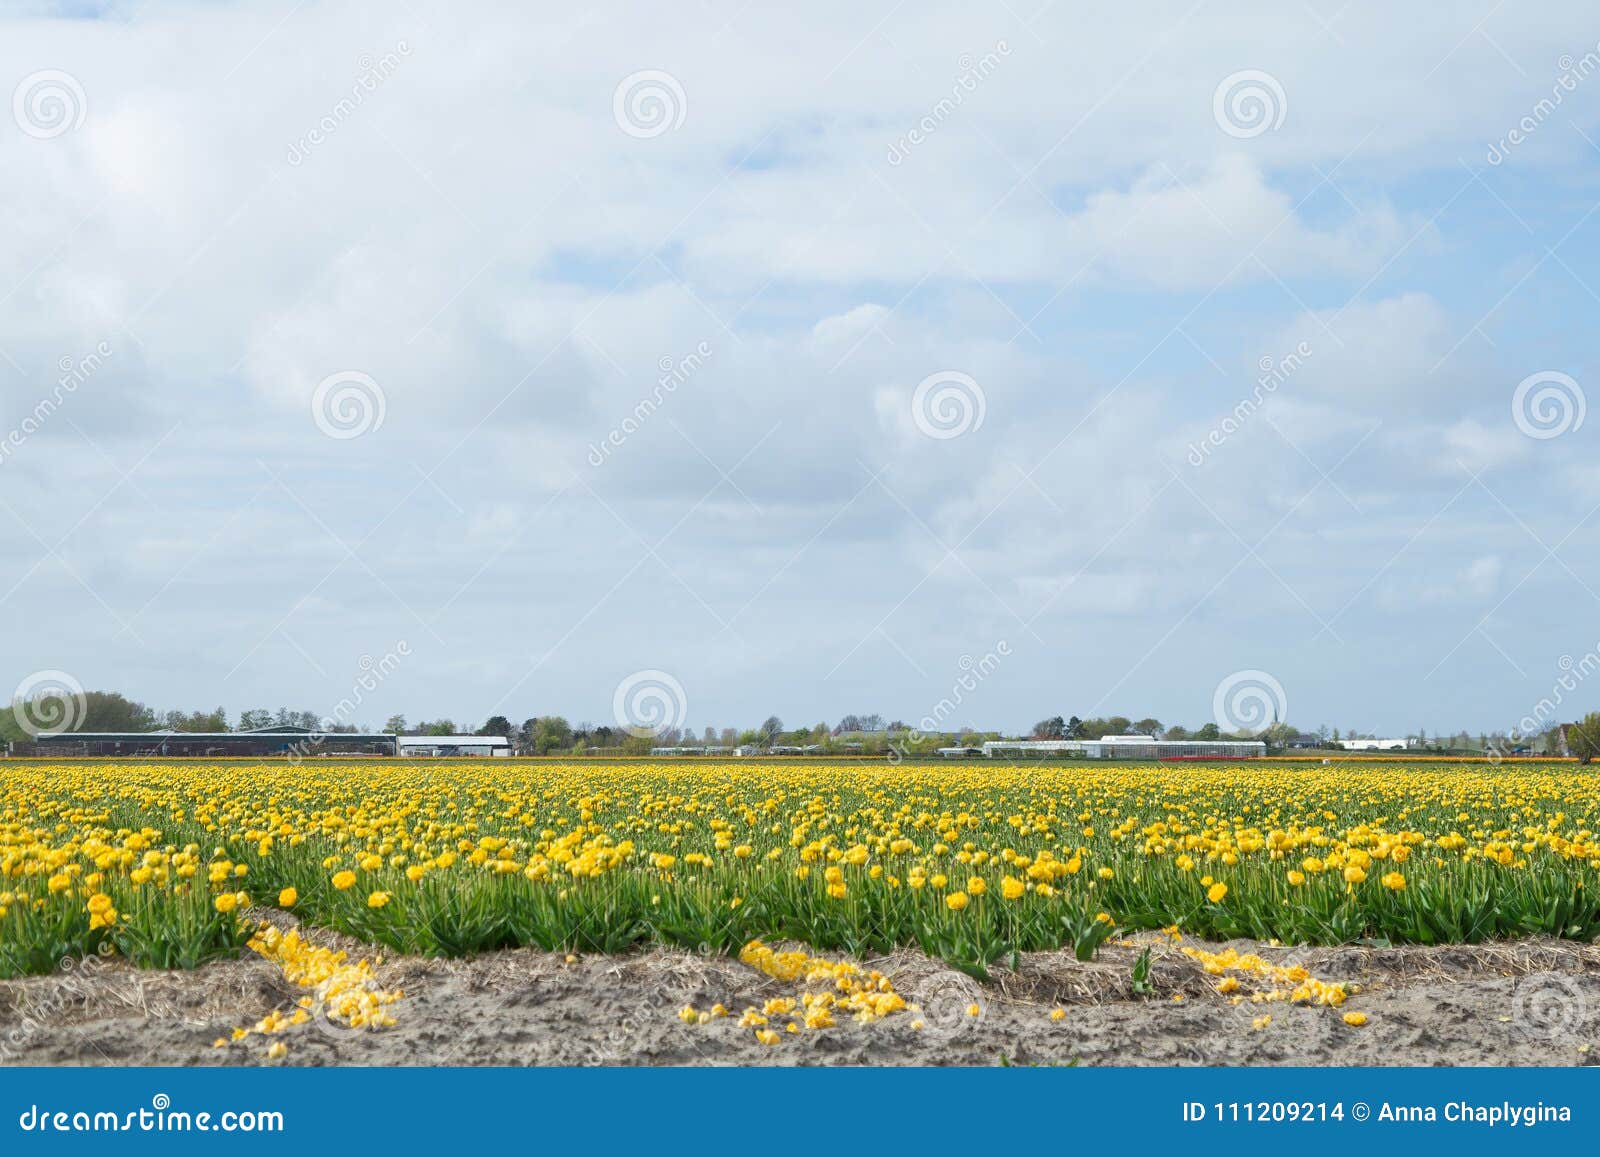 blooming flower fields of yellow tulips near the canal of dutch